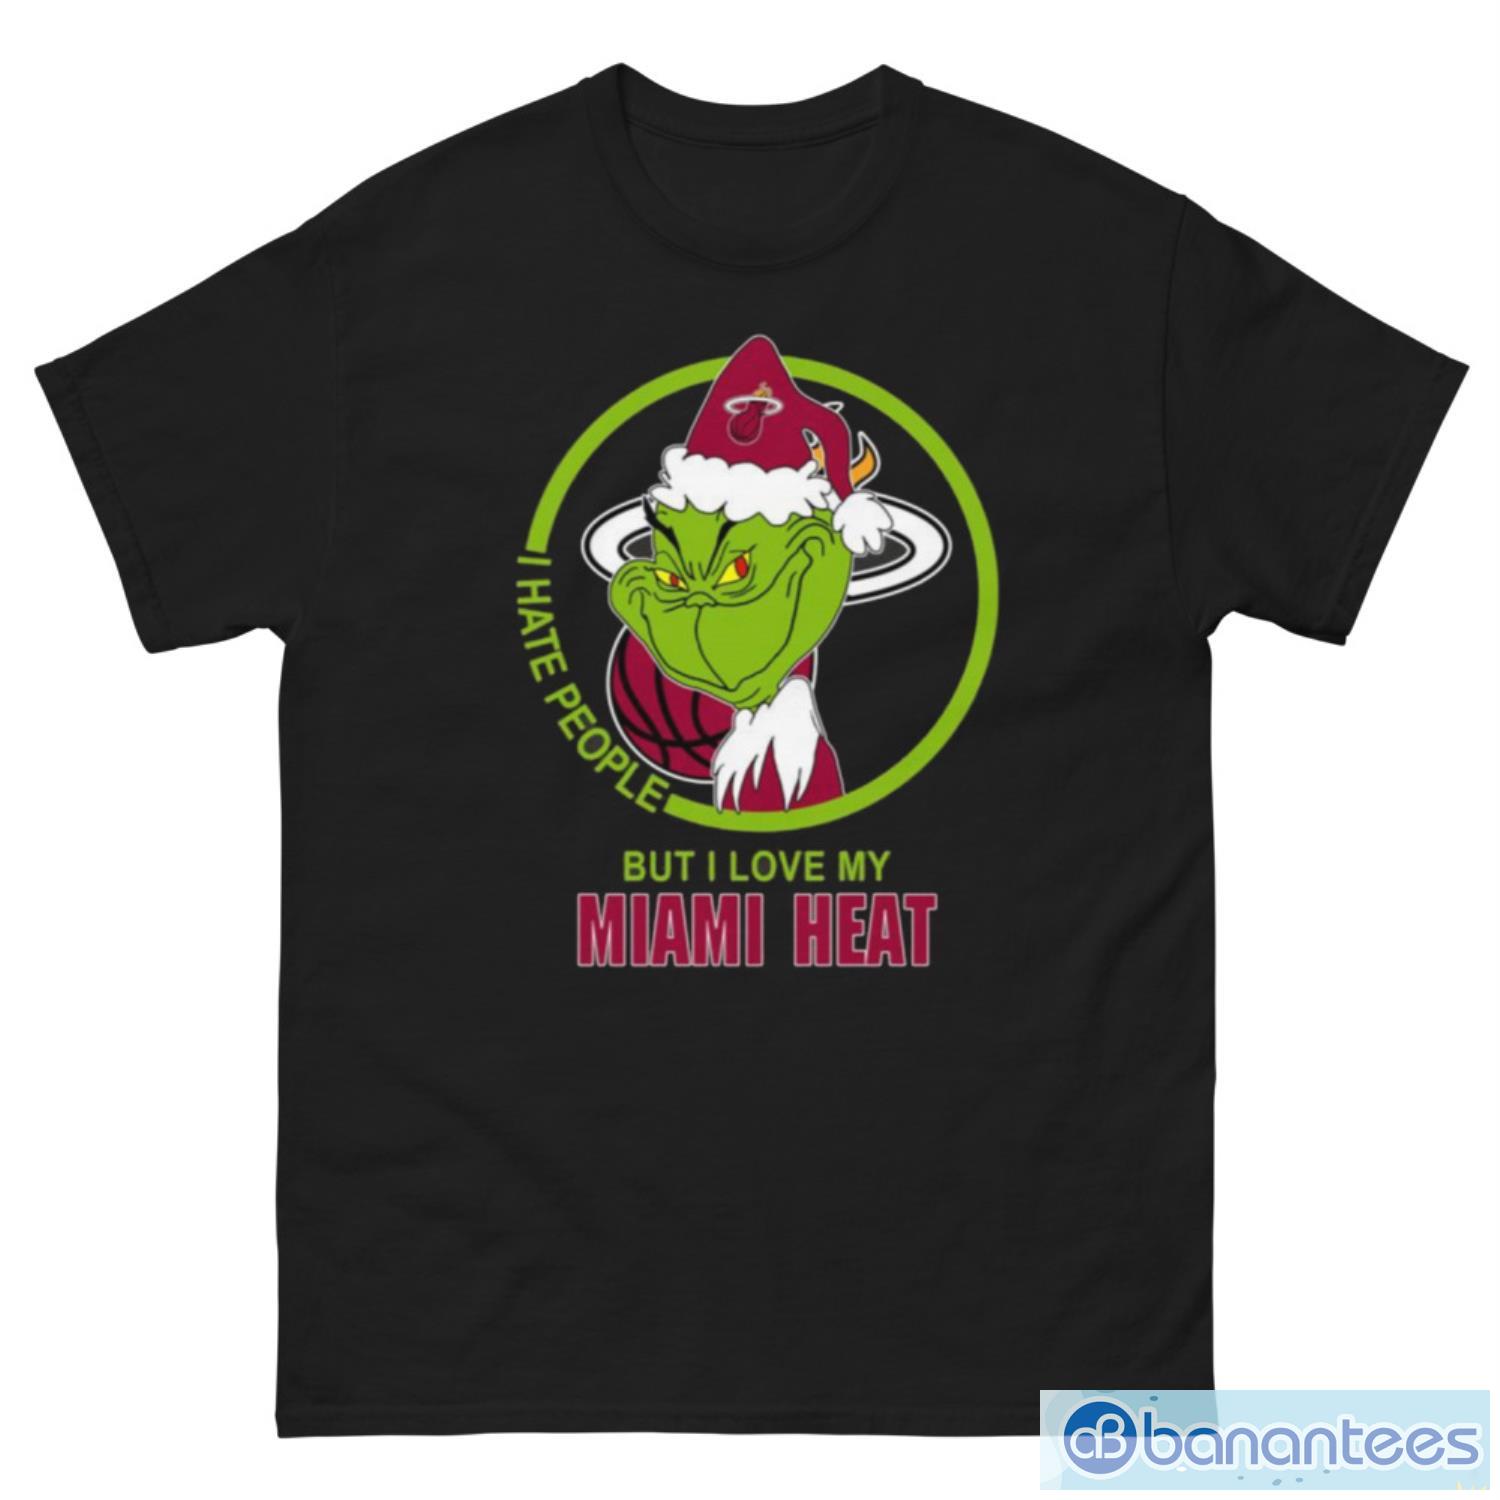 Miami Heat NBA Christmas Grinch I Hate People But I Love My Favorite Basketball Team T Shirt - G500 Men’s Classic Tee